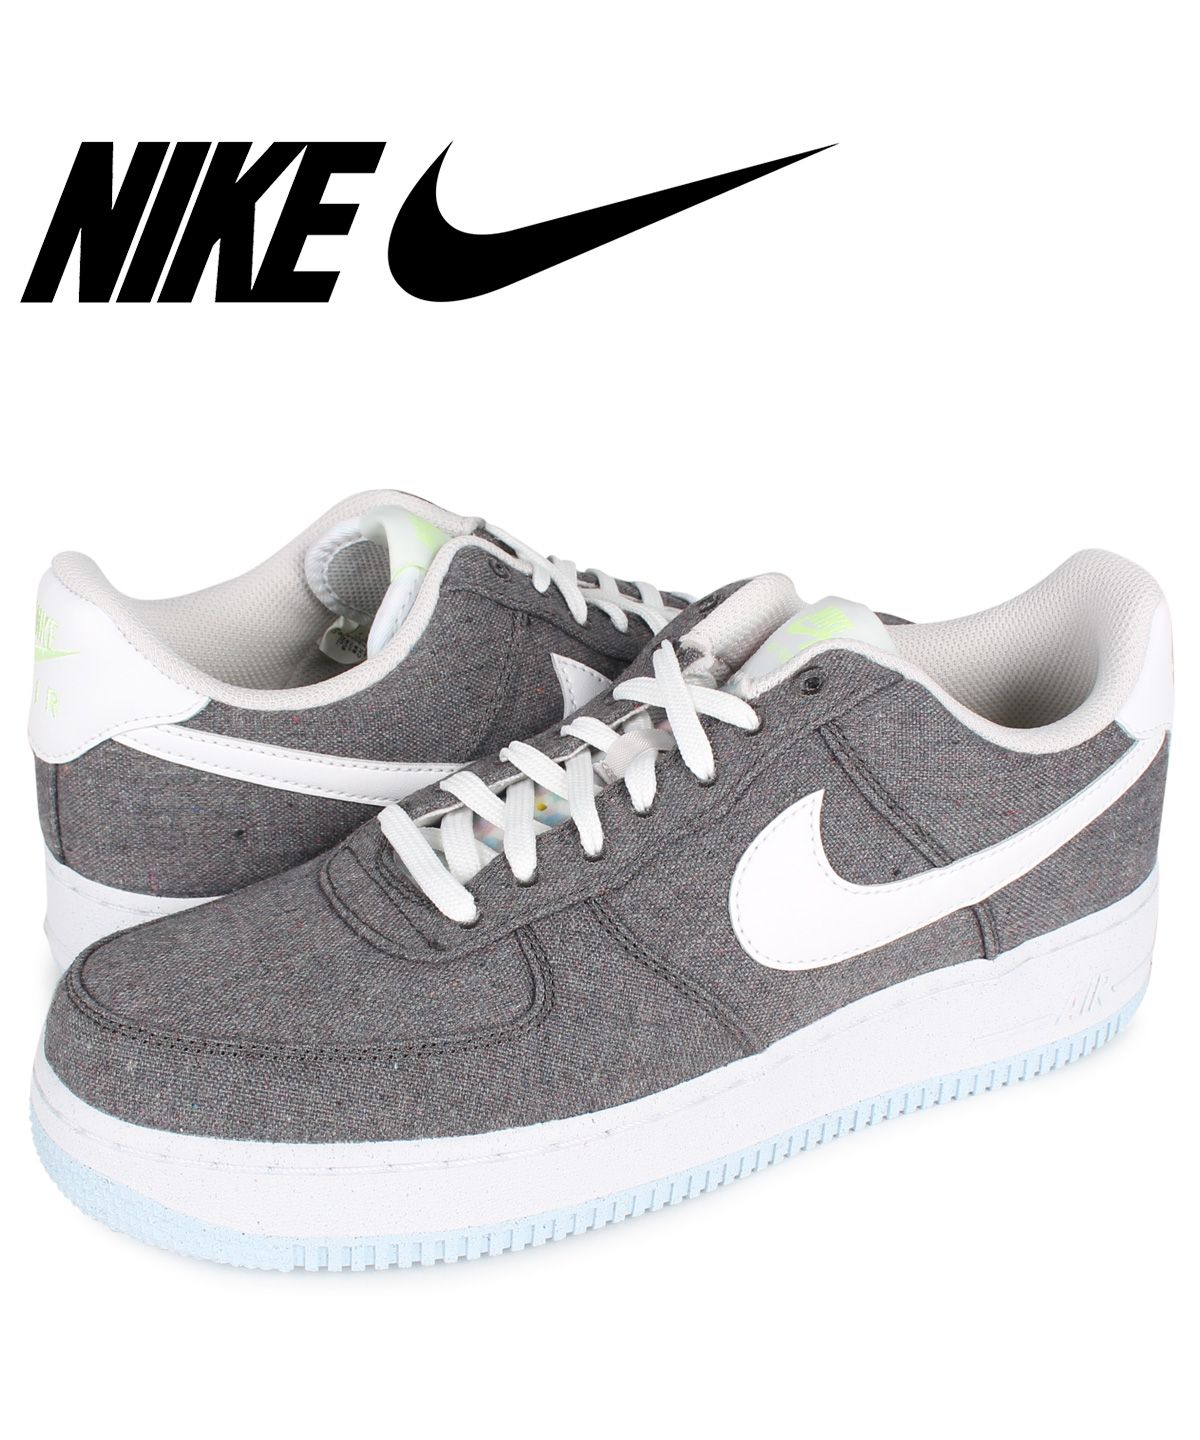 NIKE AIR FORCE 1 07 RECYCLED CANVAS PACK ナイキ エアフォース1 スニーカー メンズ グレー  CN0866－002